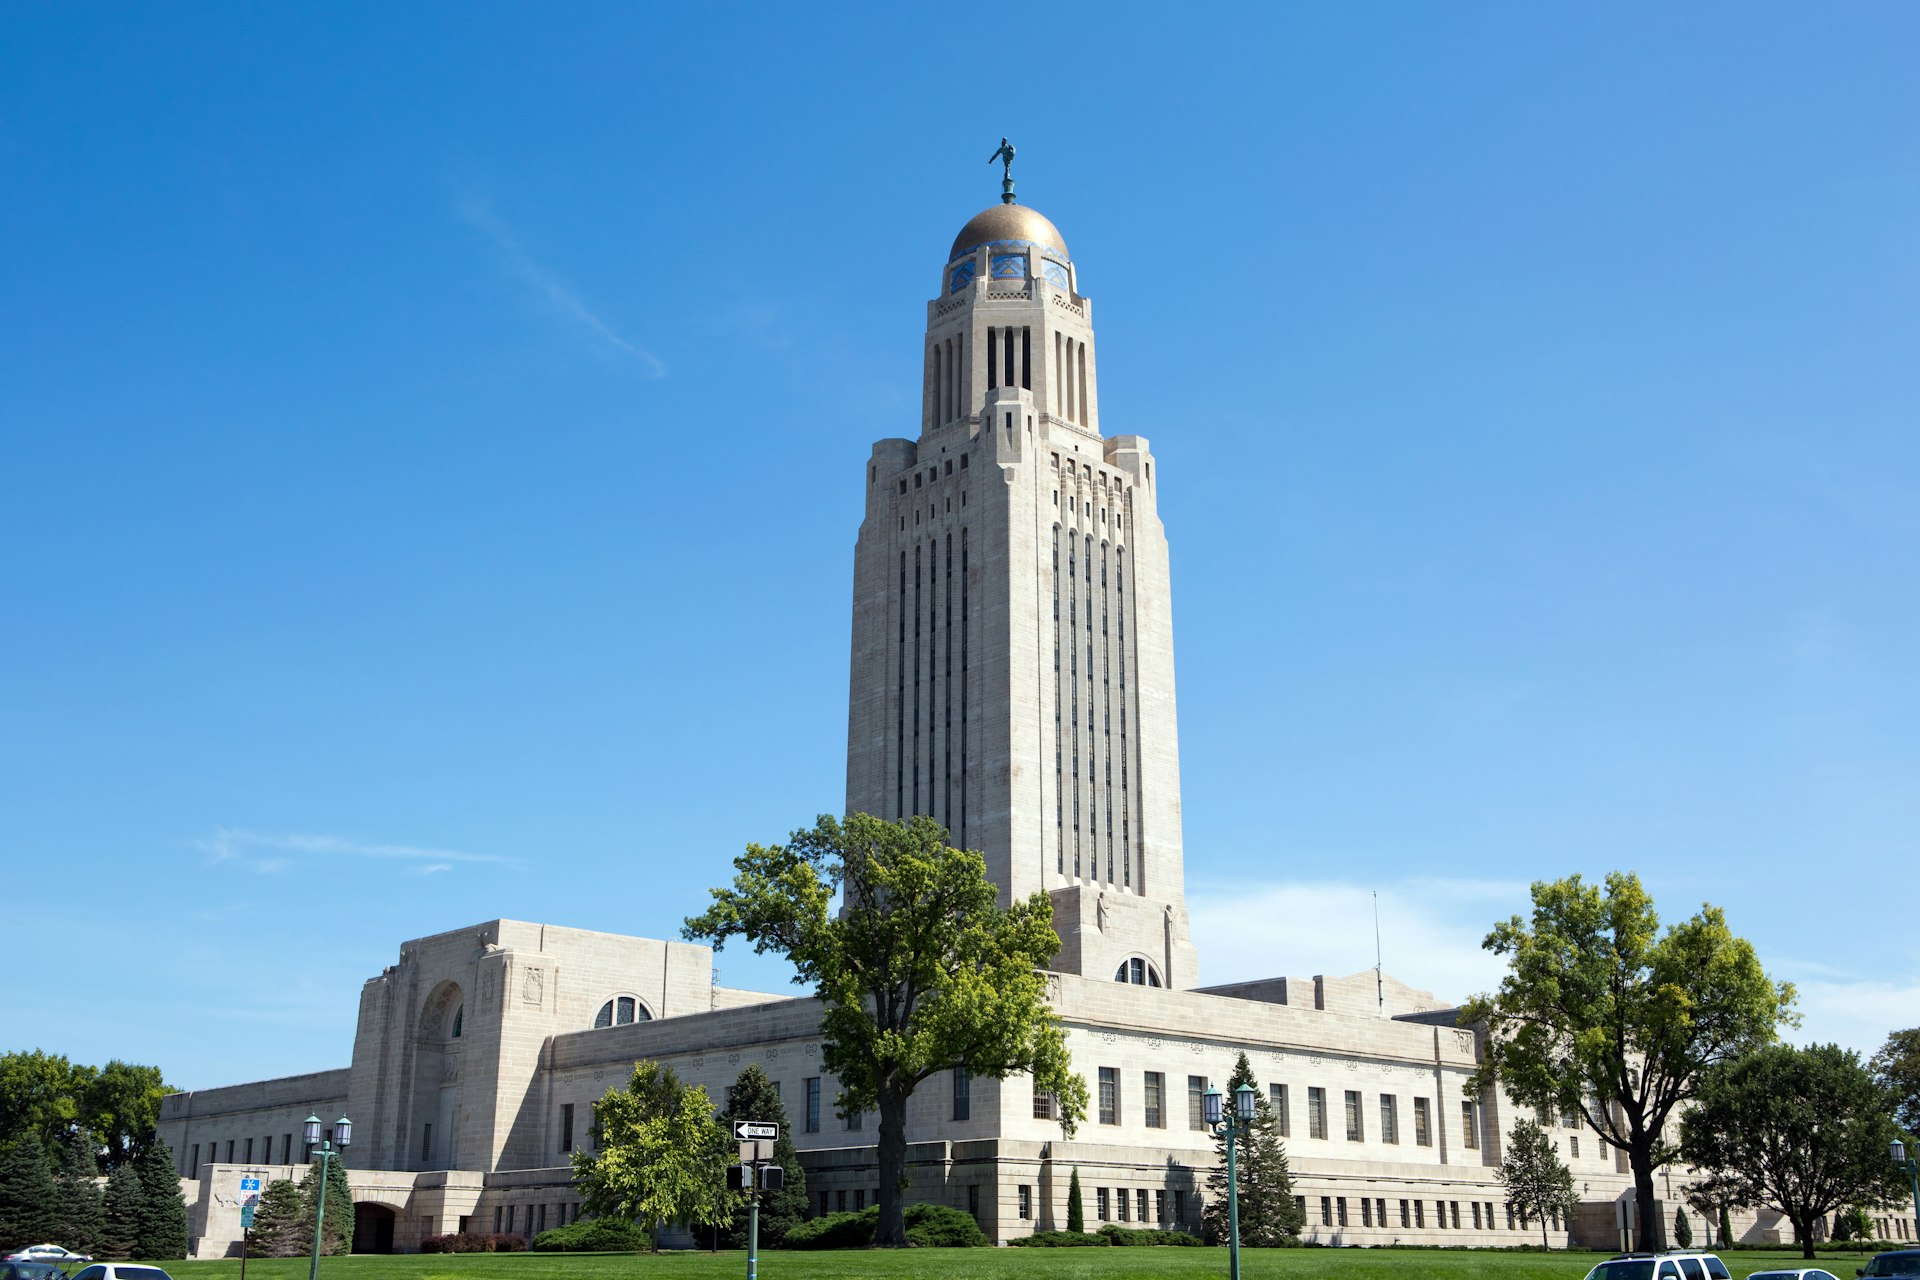 Giggle if you must at its nickname, but the Nebraska capitol building does make a distinctive addition to the Lincoln skyline © sframephoto / Getty Images